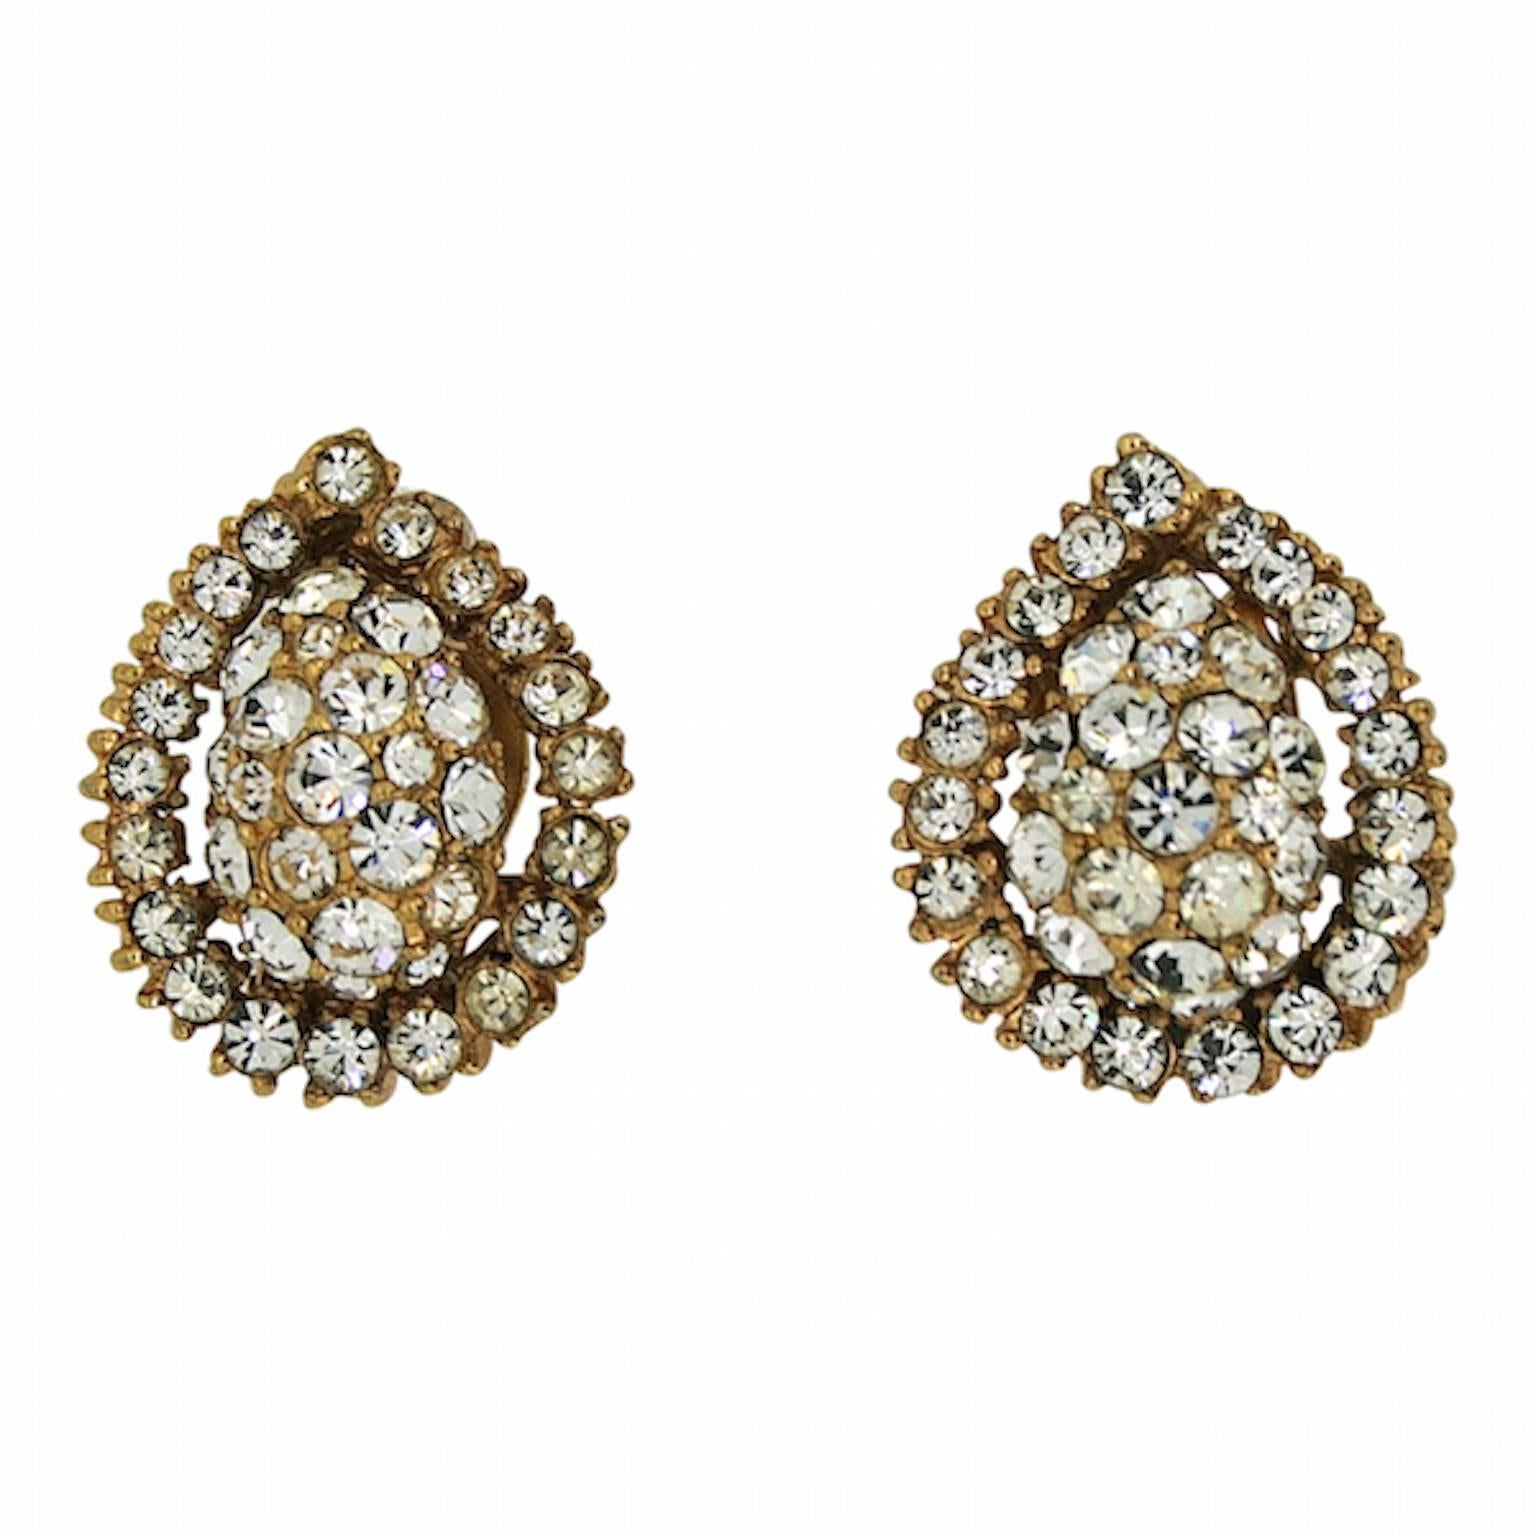 Christian Dior by Mitchel Maer 1950s Vintage Rhinestone Earrings For Sale